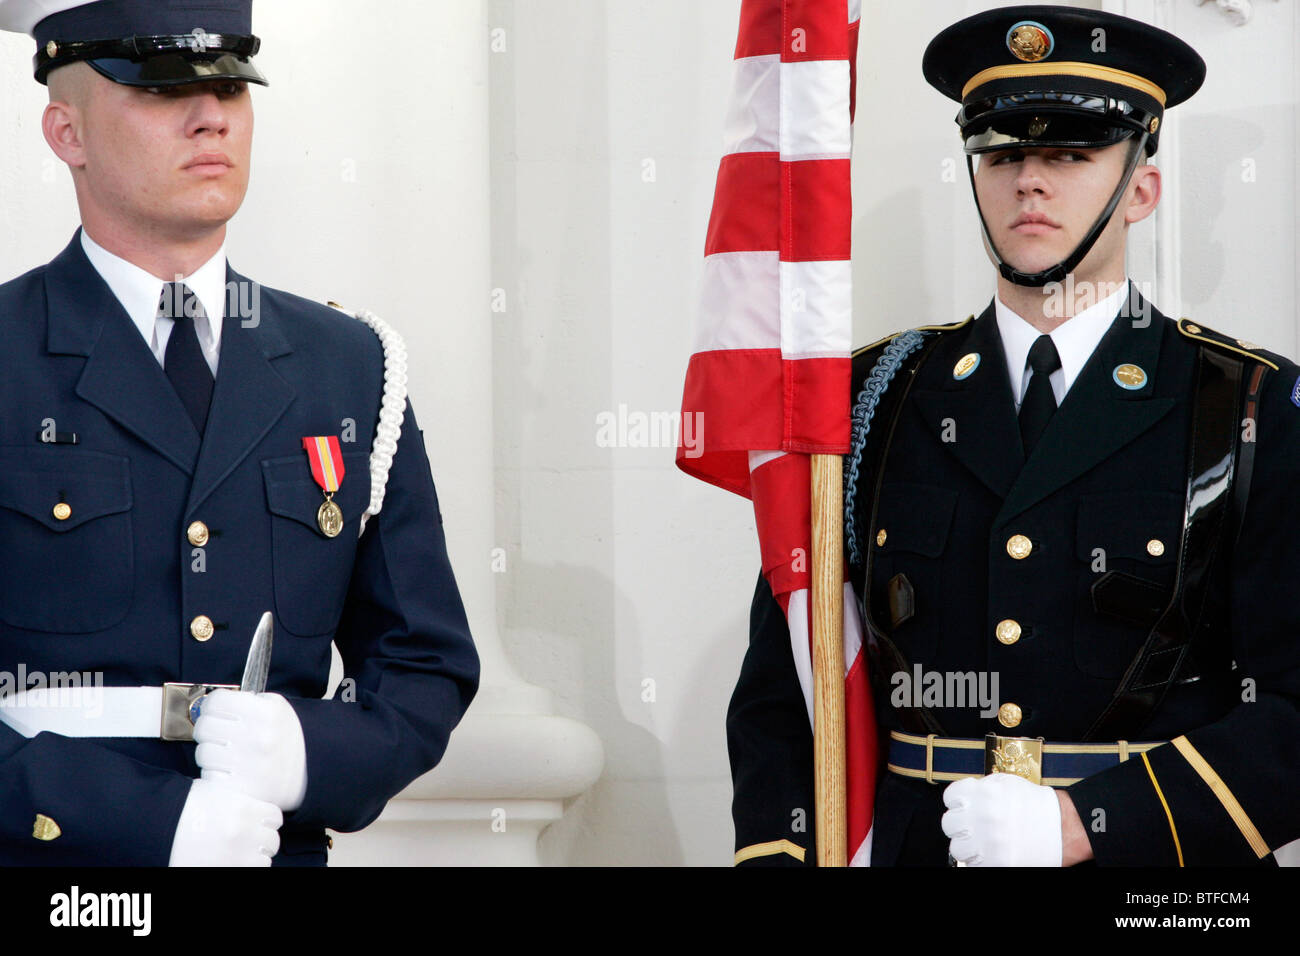 Military officers form Honor Guard traditionally of Airforce, Army, Navy, Coastguard and Marines, at The White House, USA Stock Photo